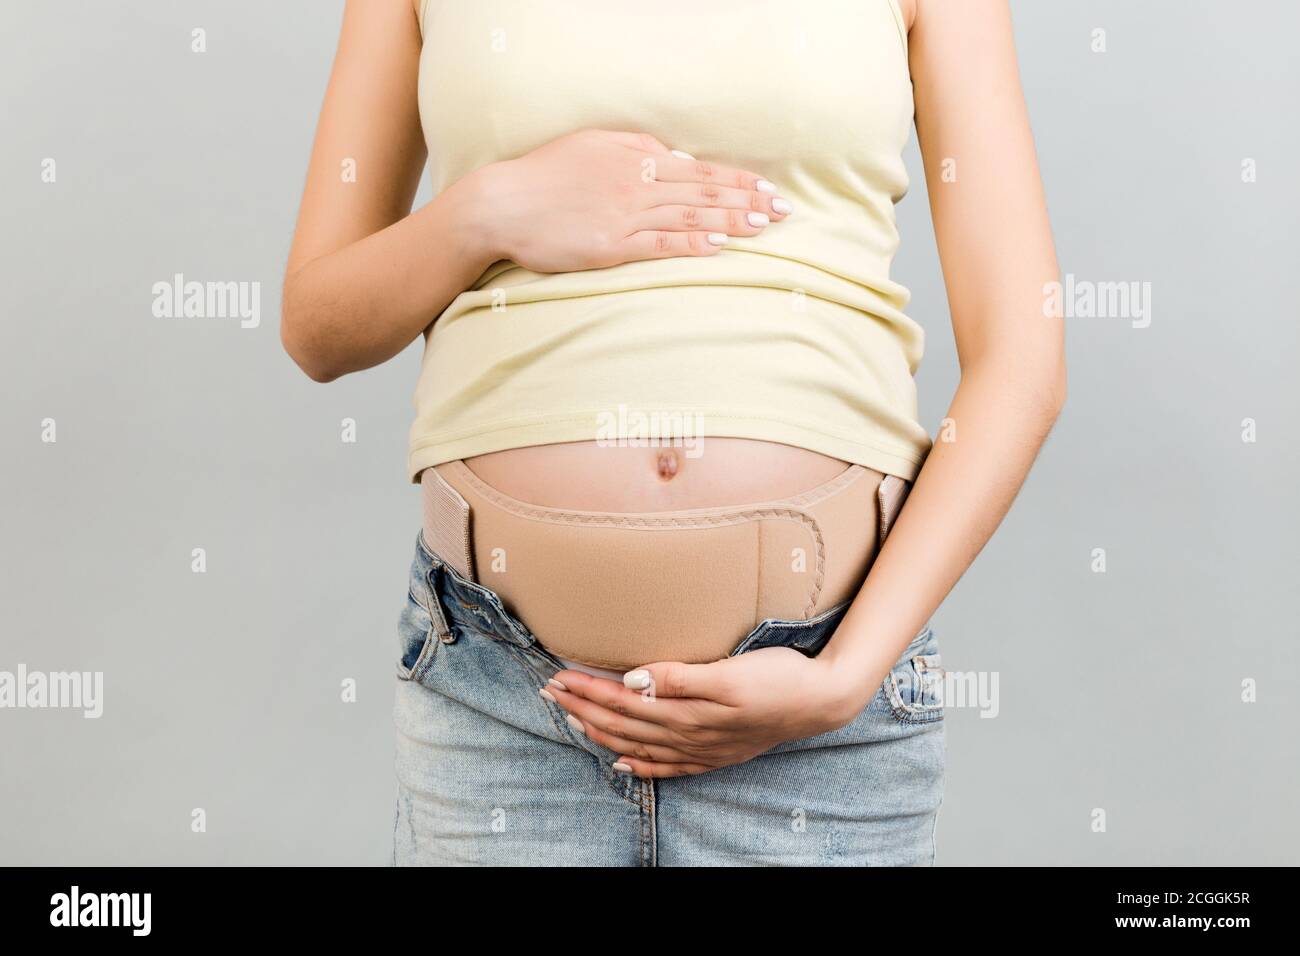 https://c8.alamy.com/comp/2CGGK5R/close-up-of-pregnant-woman-wearing-pregnancy-corset-against-backpain-at-gray-background-with-copy-space-orthopedic-abdominal-support-belt-concept-2CGGK5R.jpg